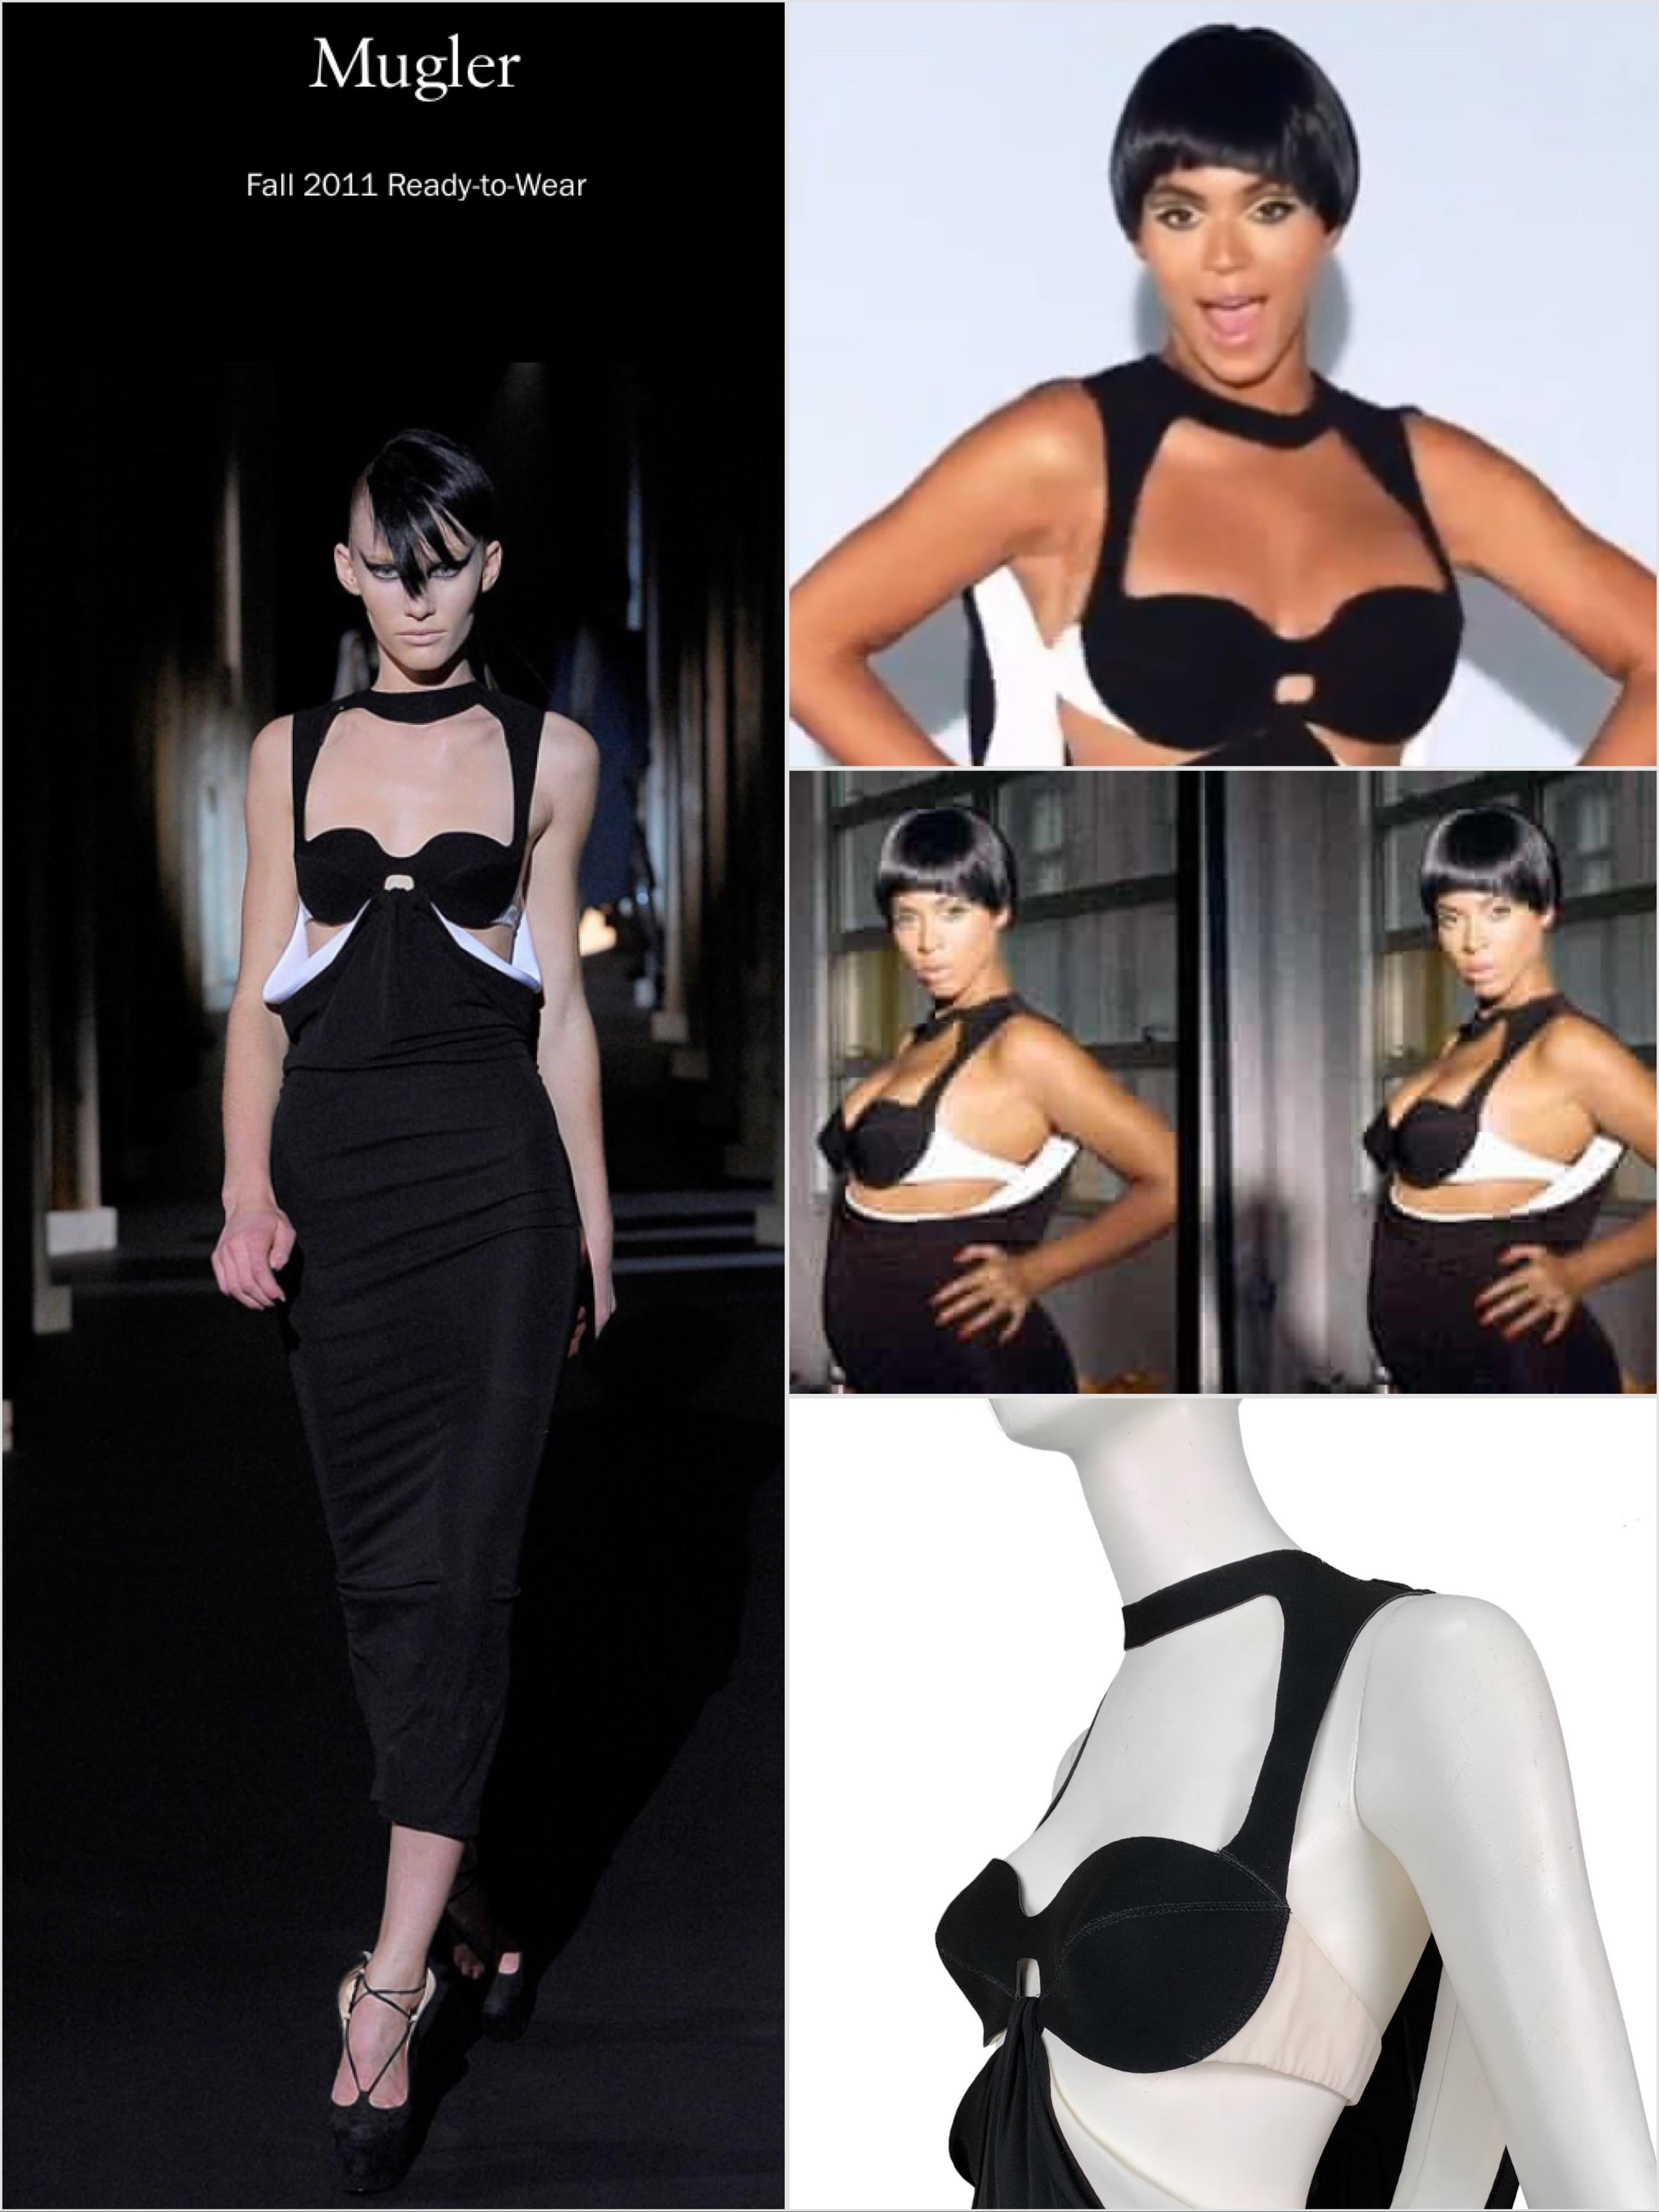 I bought this Mugler RTW Spring 2011 look 9 evening gown from a Parisian lady who insisted this is THE exact dress that Beyoncé wore in the “Countdown” music video for one of her iconic baby bump looks.  Not a similar dress, but that very dress. The